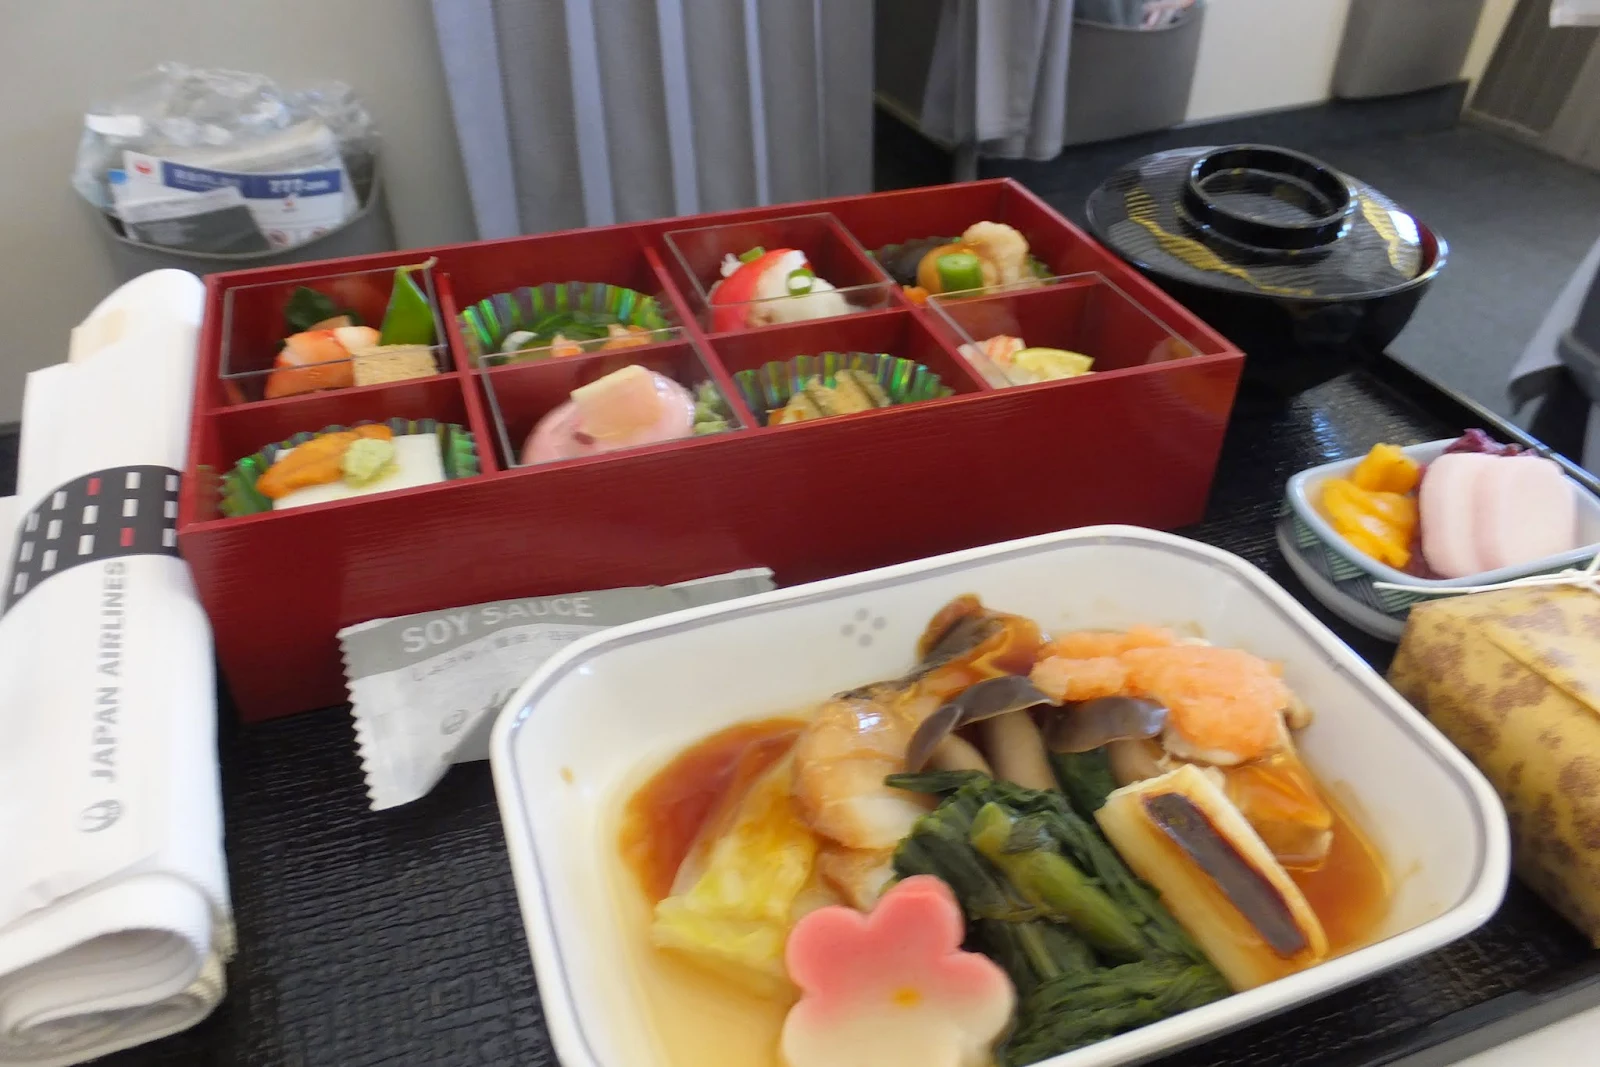 flight-meal-jl097-jal-business-class ビジネスクラスの機内食2